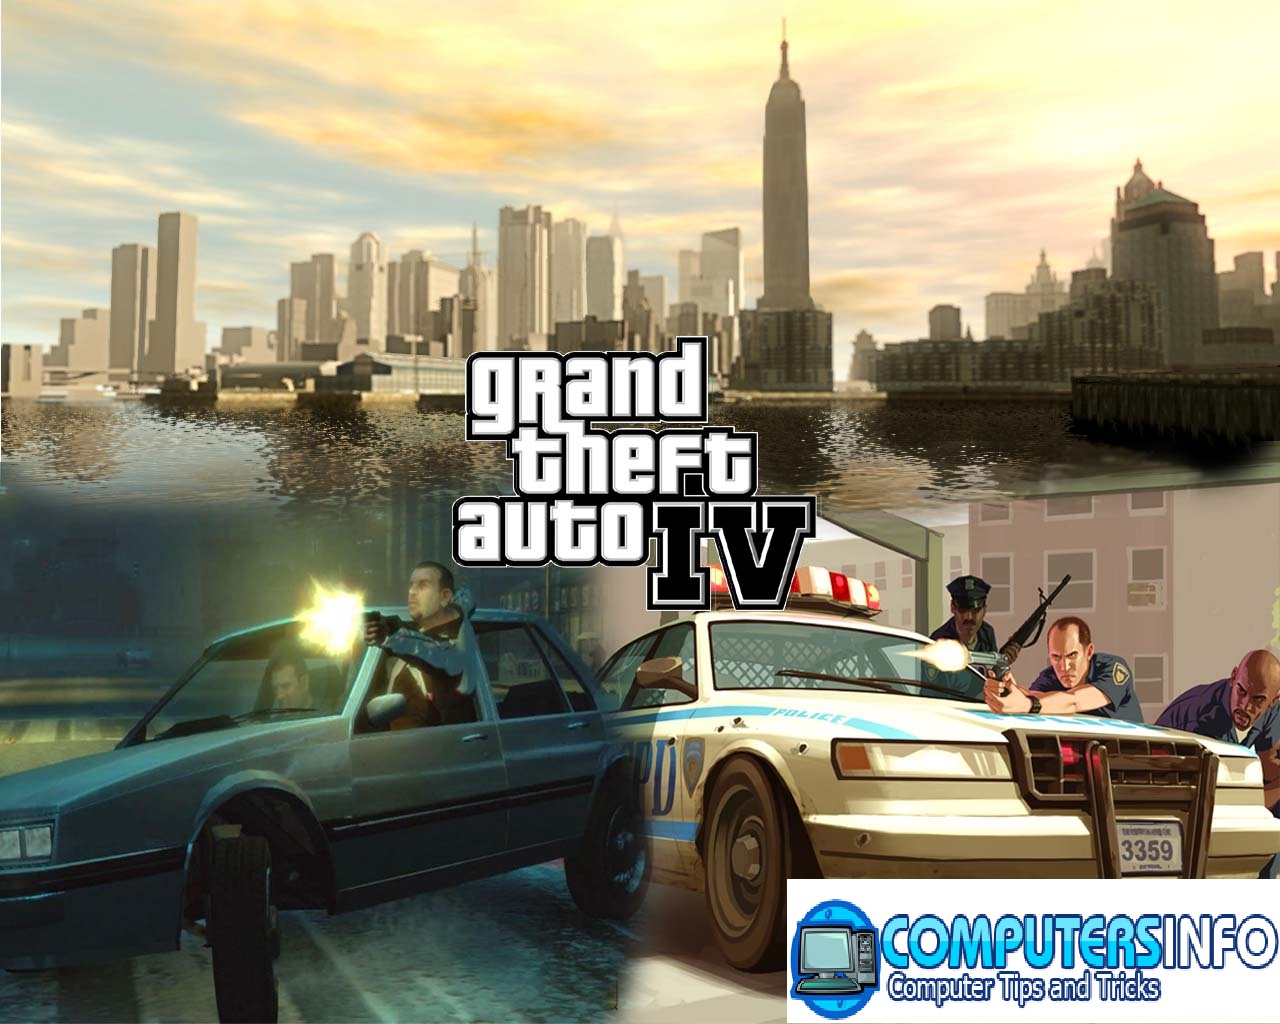 gta 4 pc highly compressed